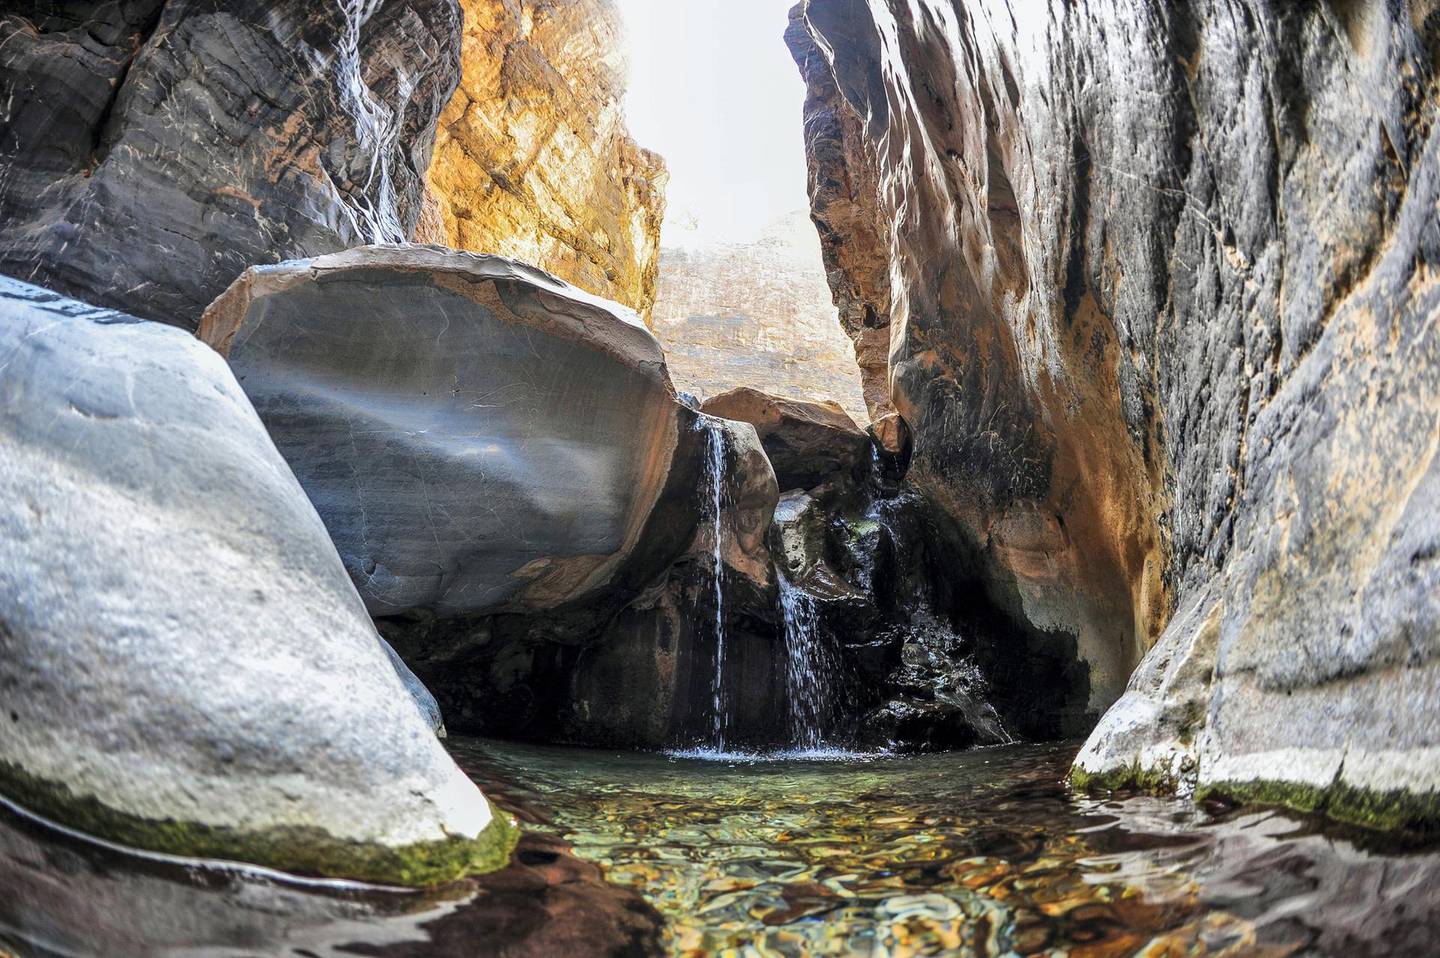 North of Nizwa, Snake Canyon Snake Gorge Canyon (Wadi Bani Awf) is one of the best places for outdoor adventurers in Oman.